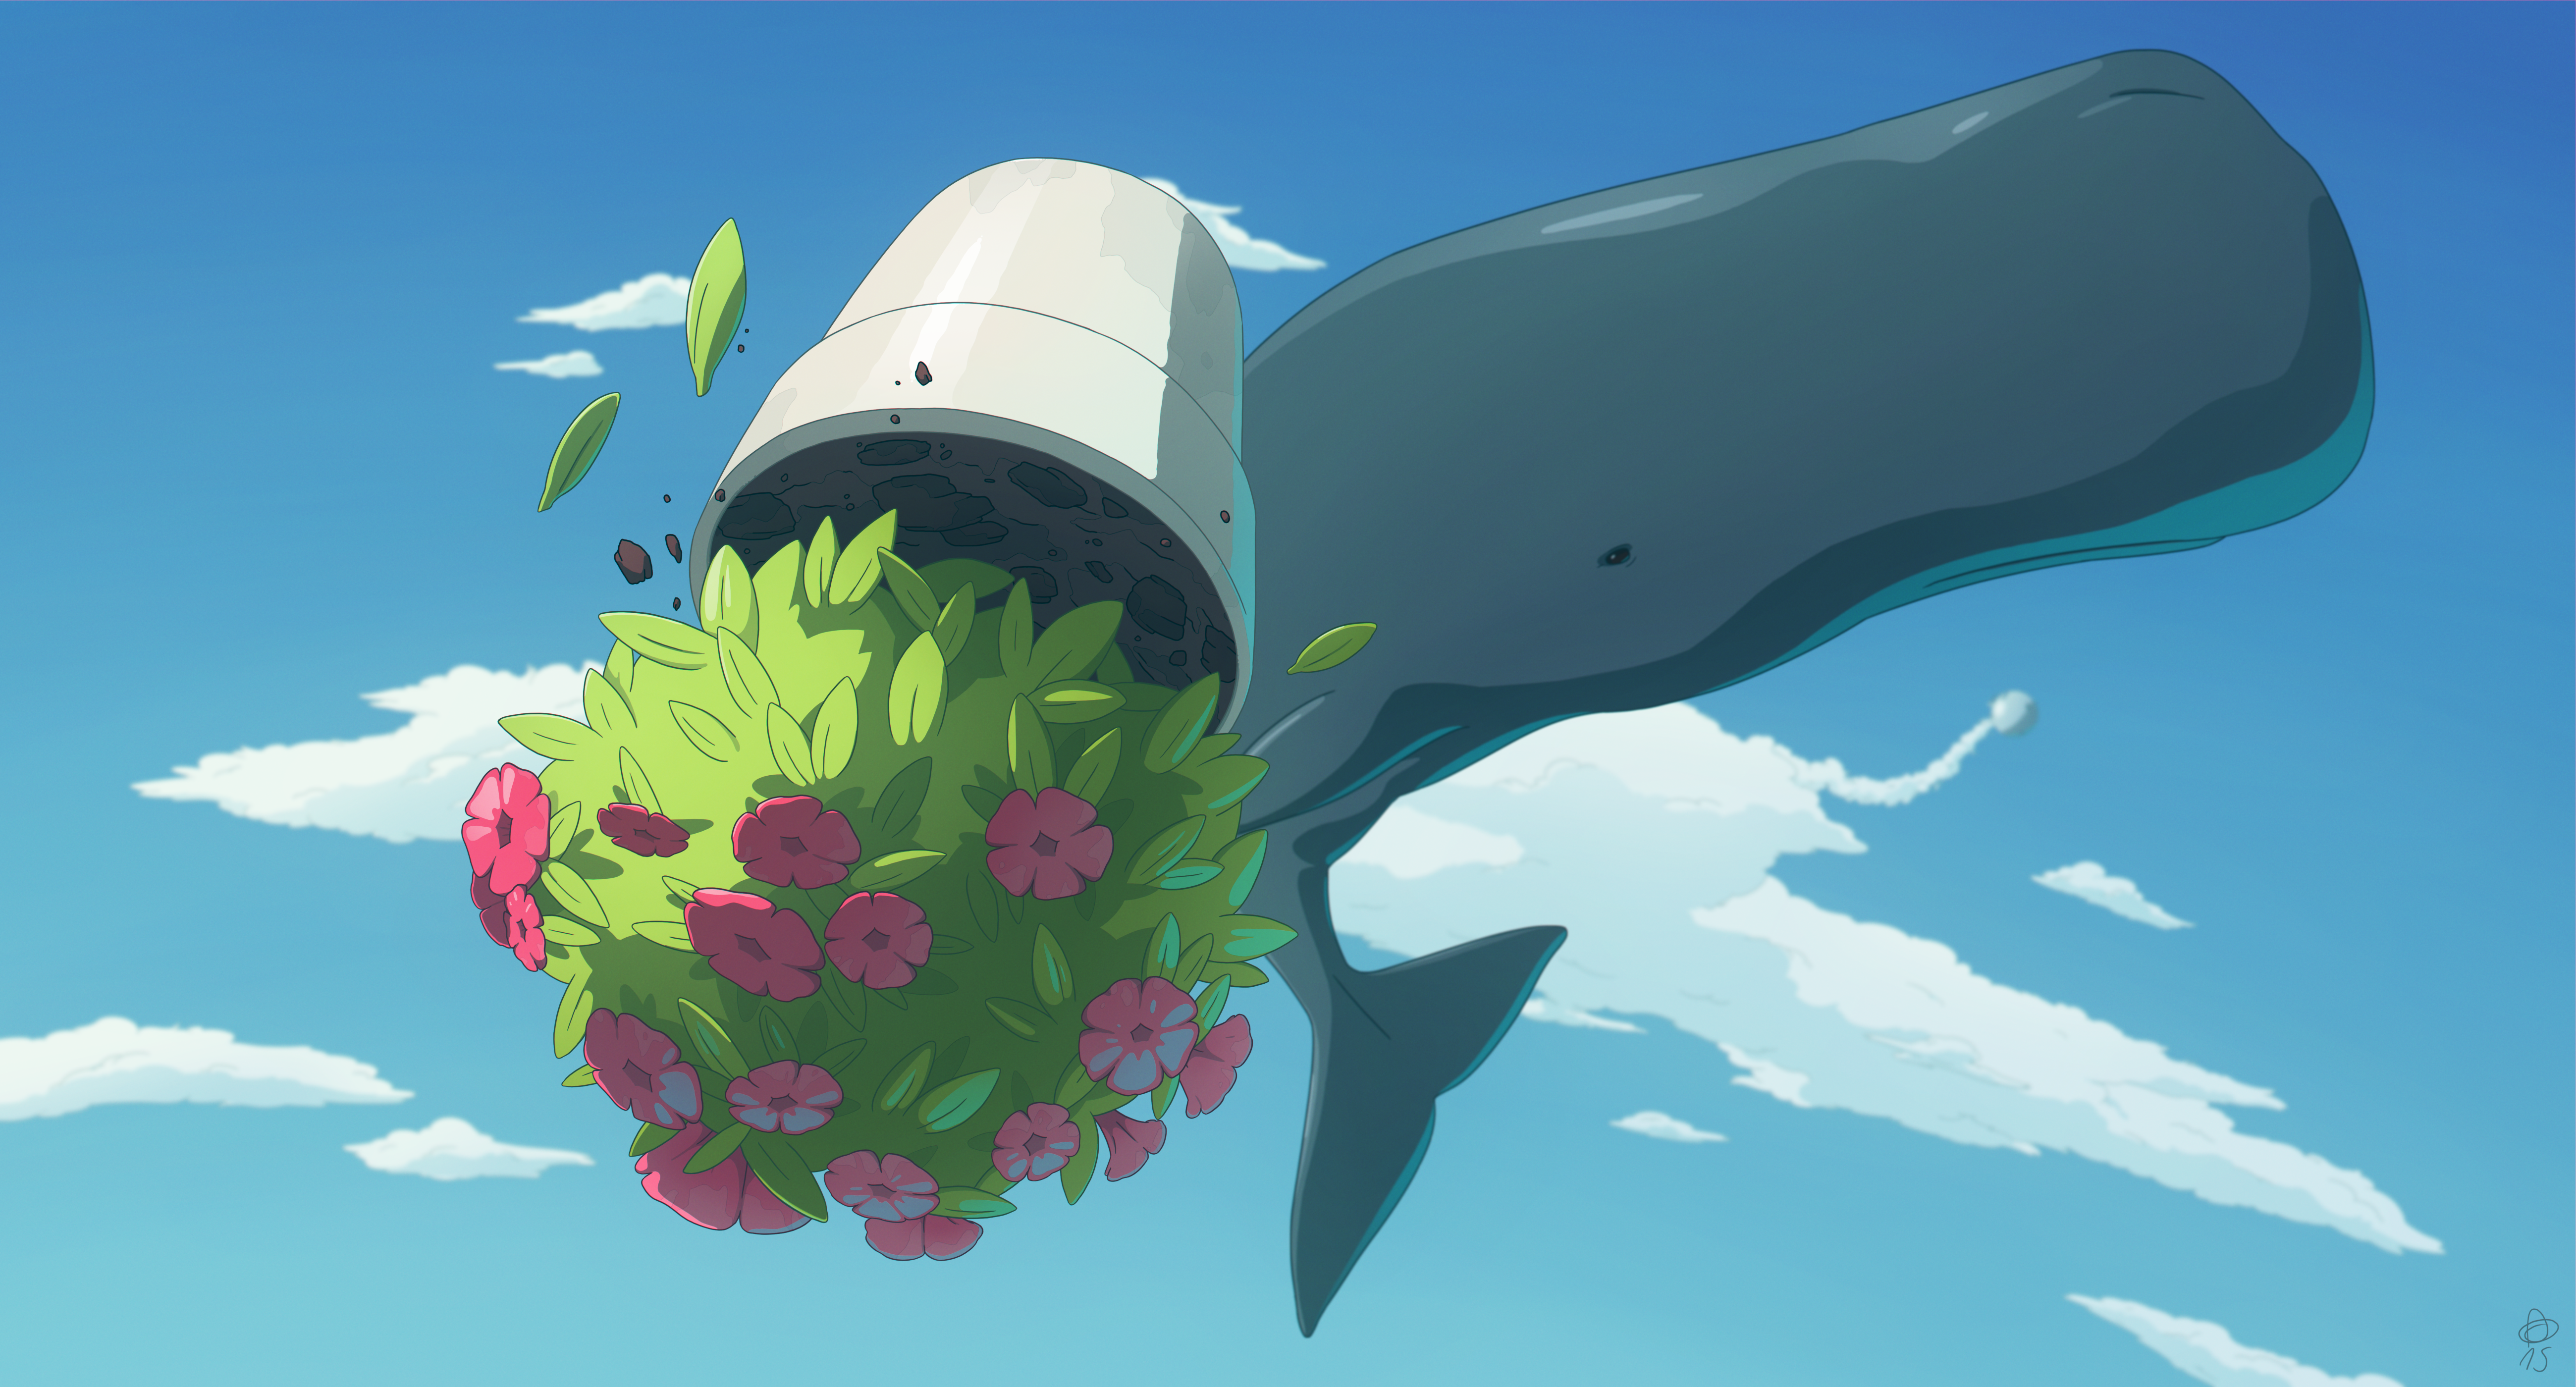 Anime 5200x2800 The Hitchhiker's Guide to the Galaxy Sperm Whale petunias